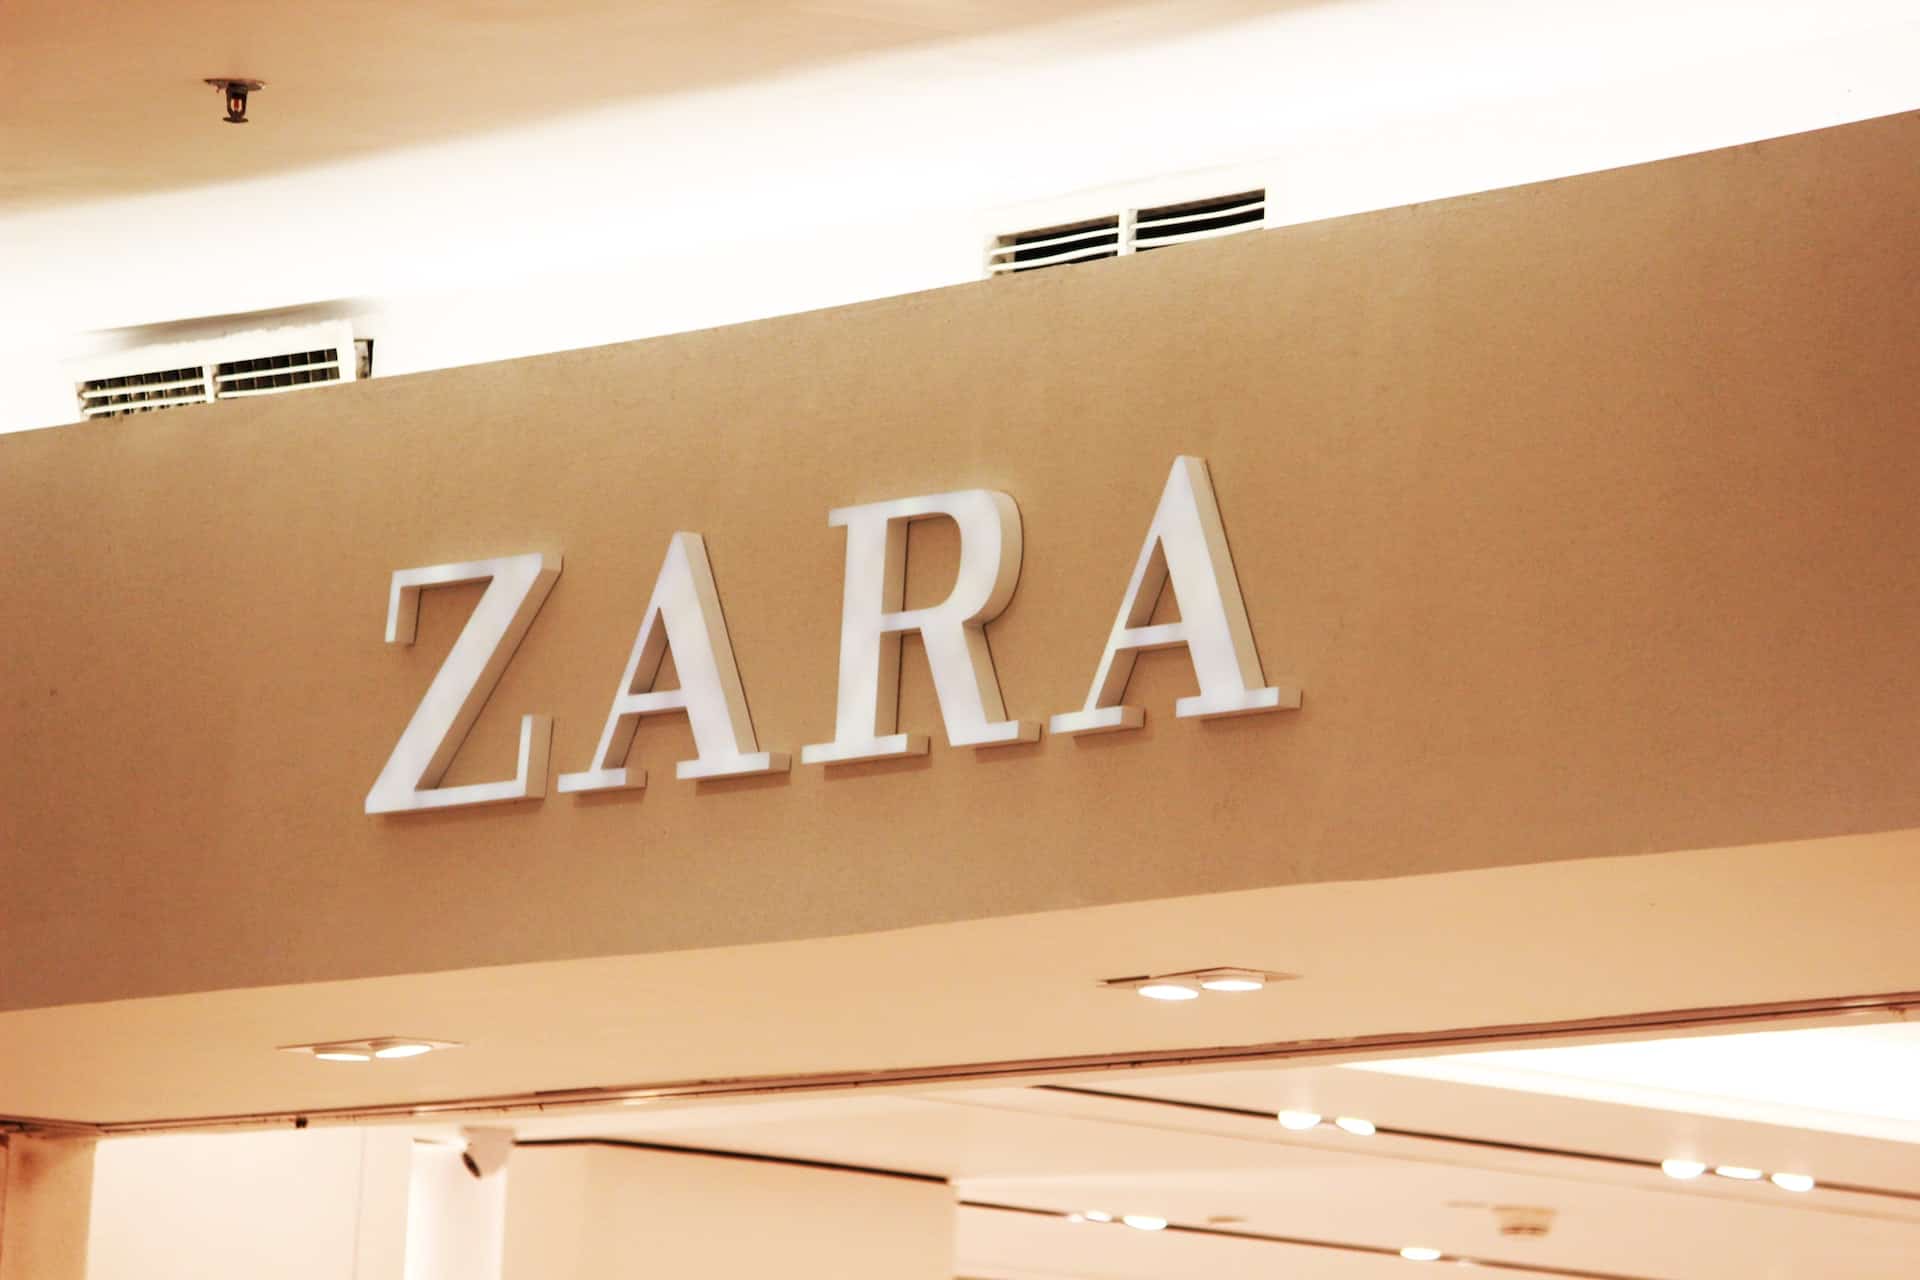 There was a Zara… or a brief history of the Spanish empire